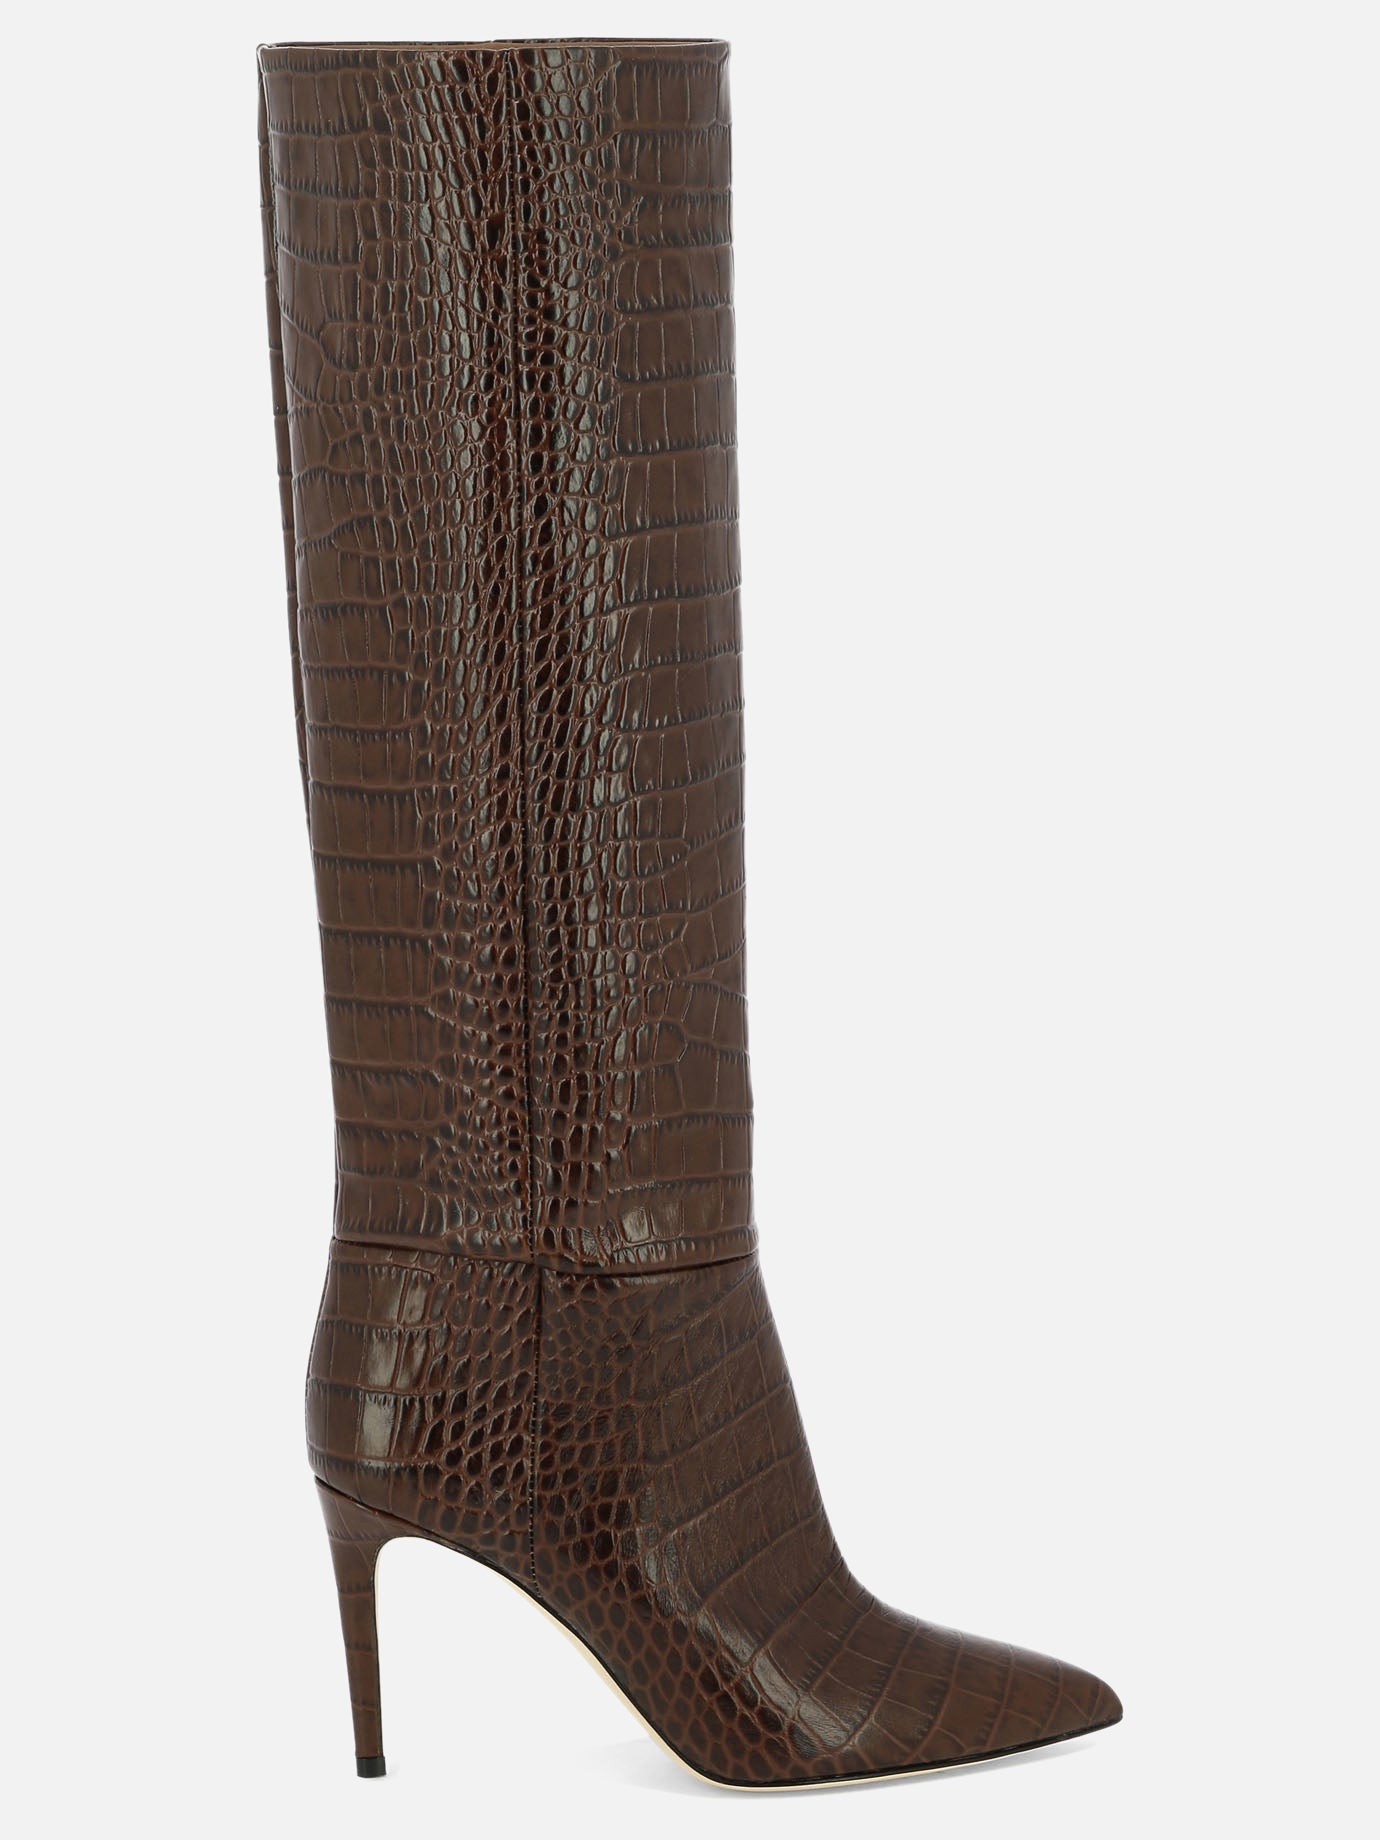 "Embossed Croco" boots